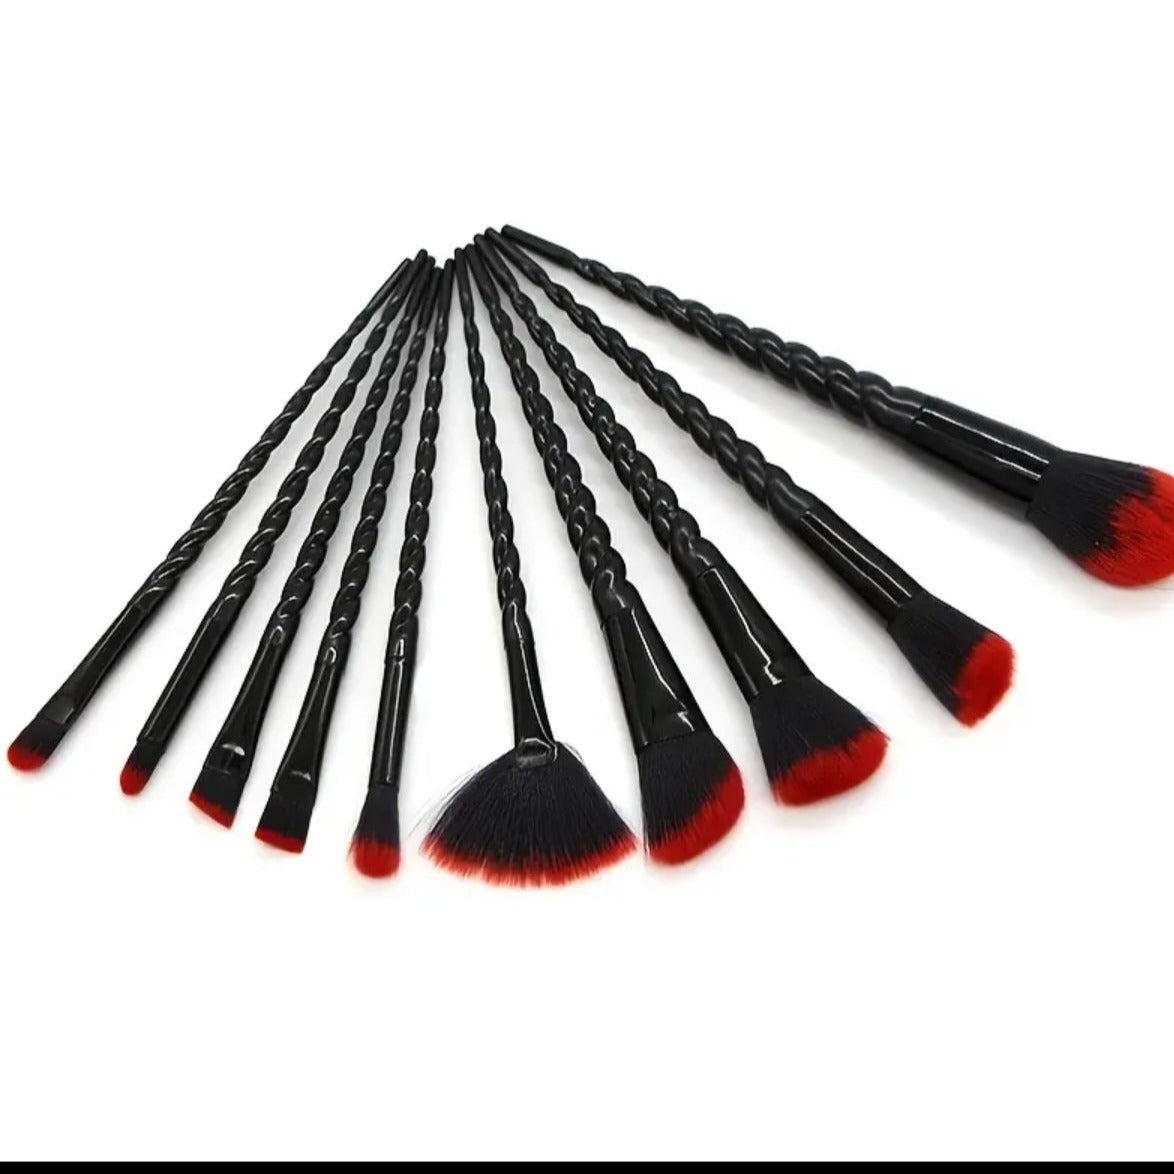 10 piece Black and red tipped make up brushes